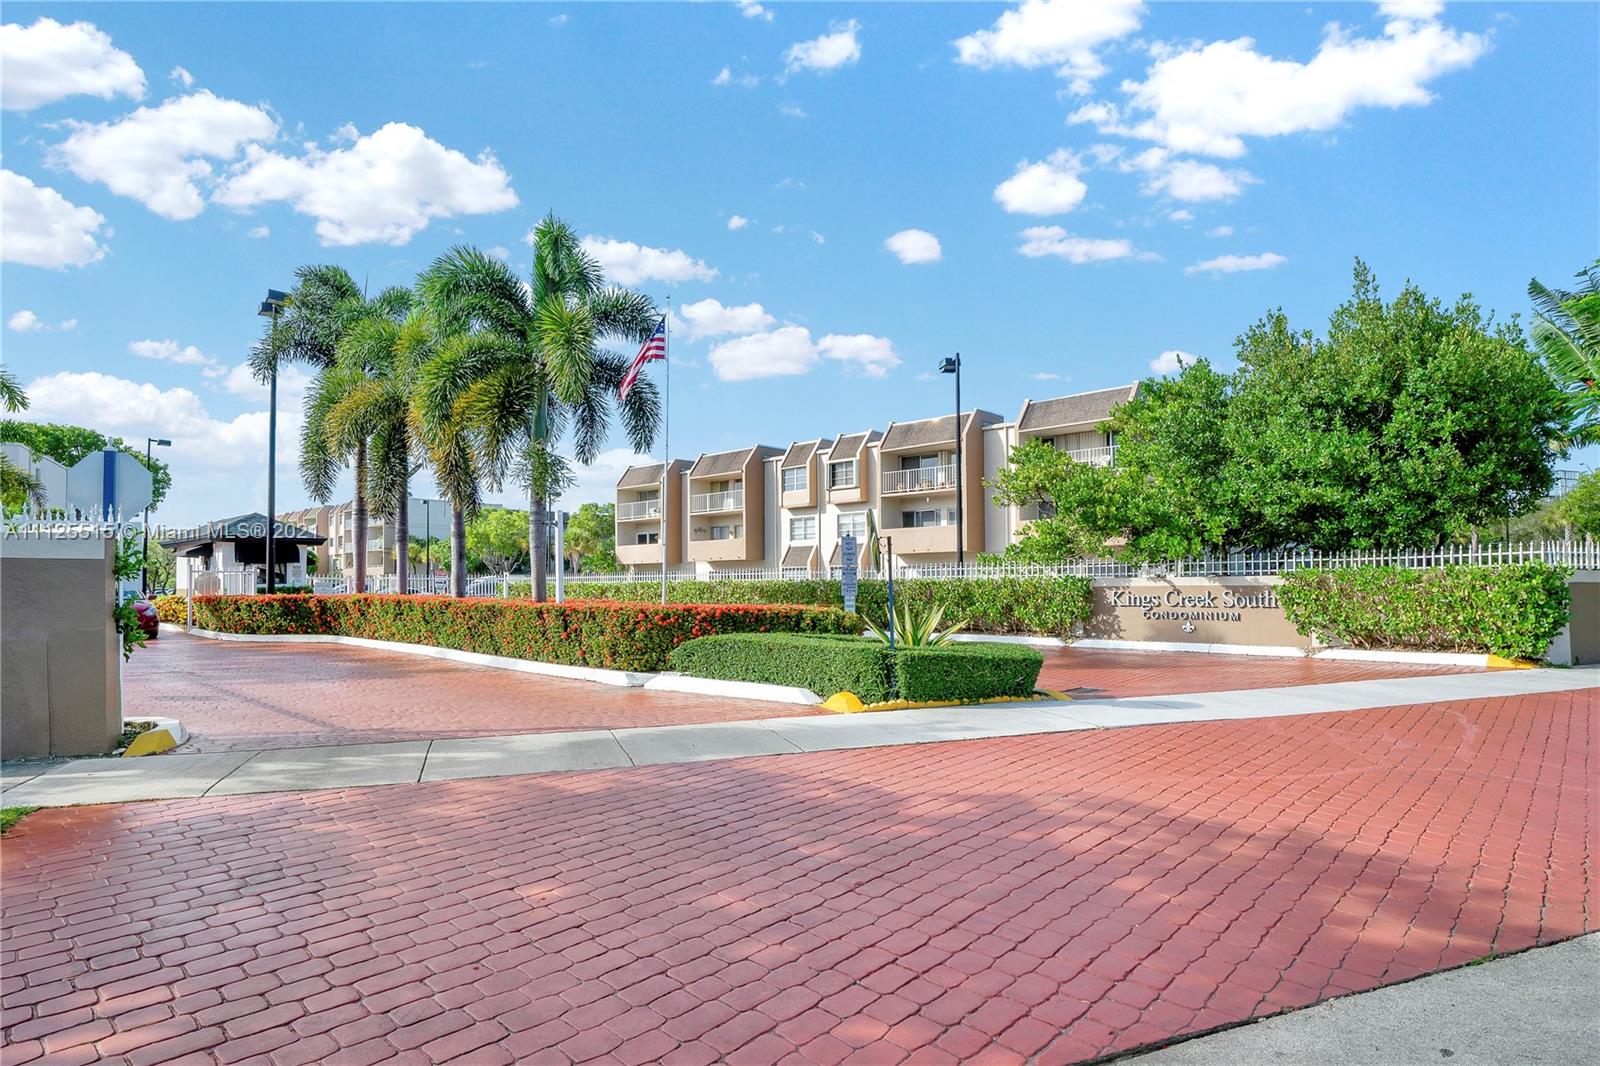 Immaculate 2 bedroom & 2 bathroom condo in the heart of Kendall near highly sought after Downtown Dadeland.  Great association with plenty of amenities. Beautifully maintained gated community with security guard which overlooks the canal.  Don’t miss out on this amazing opportunity!